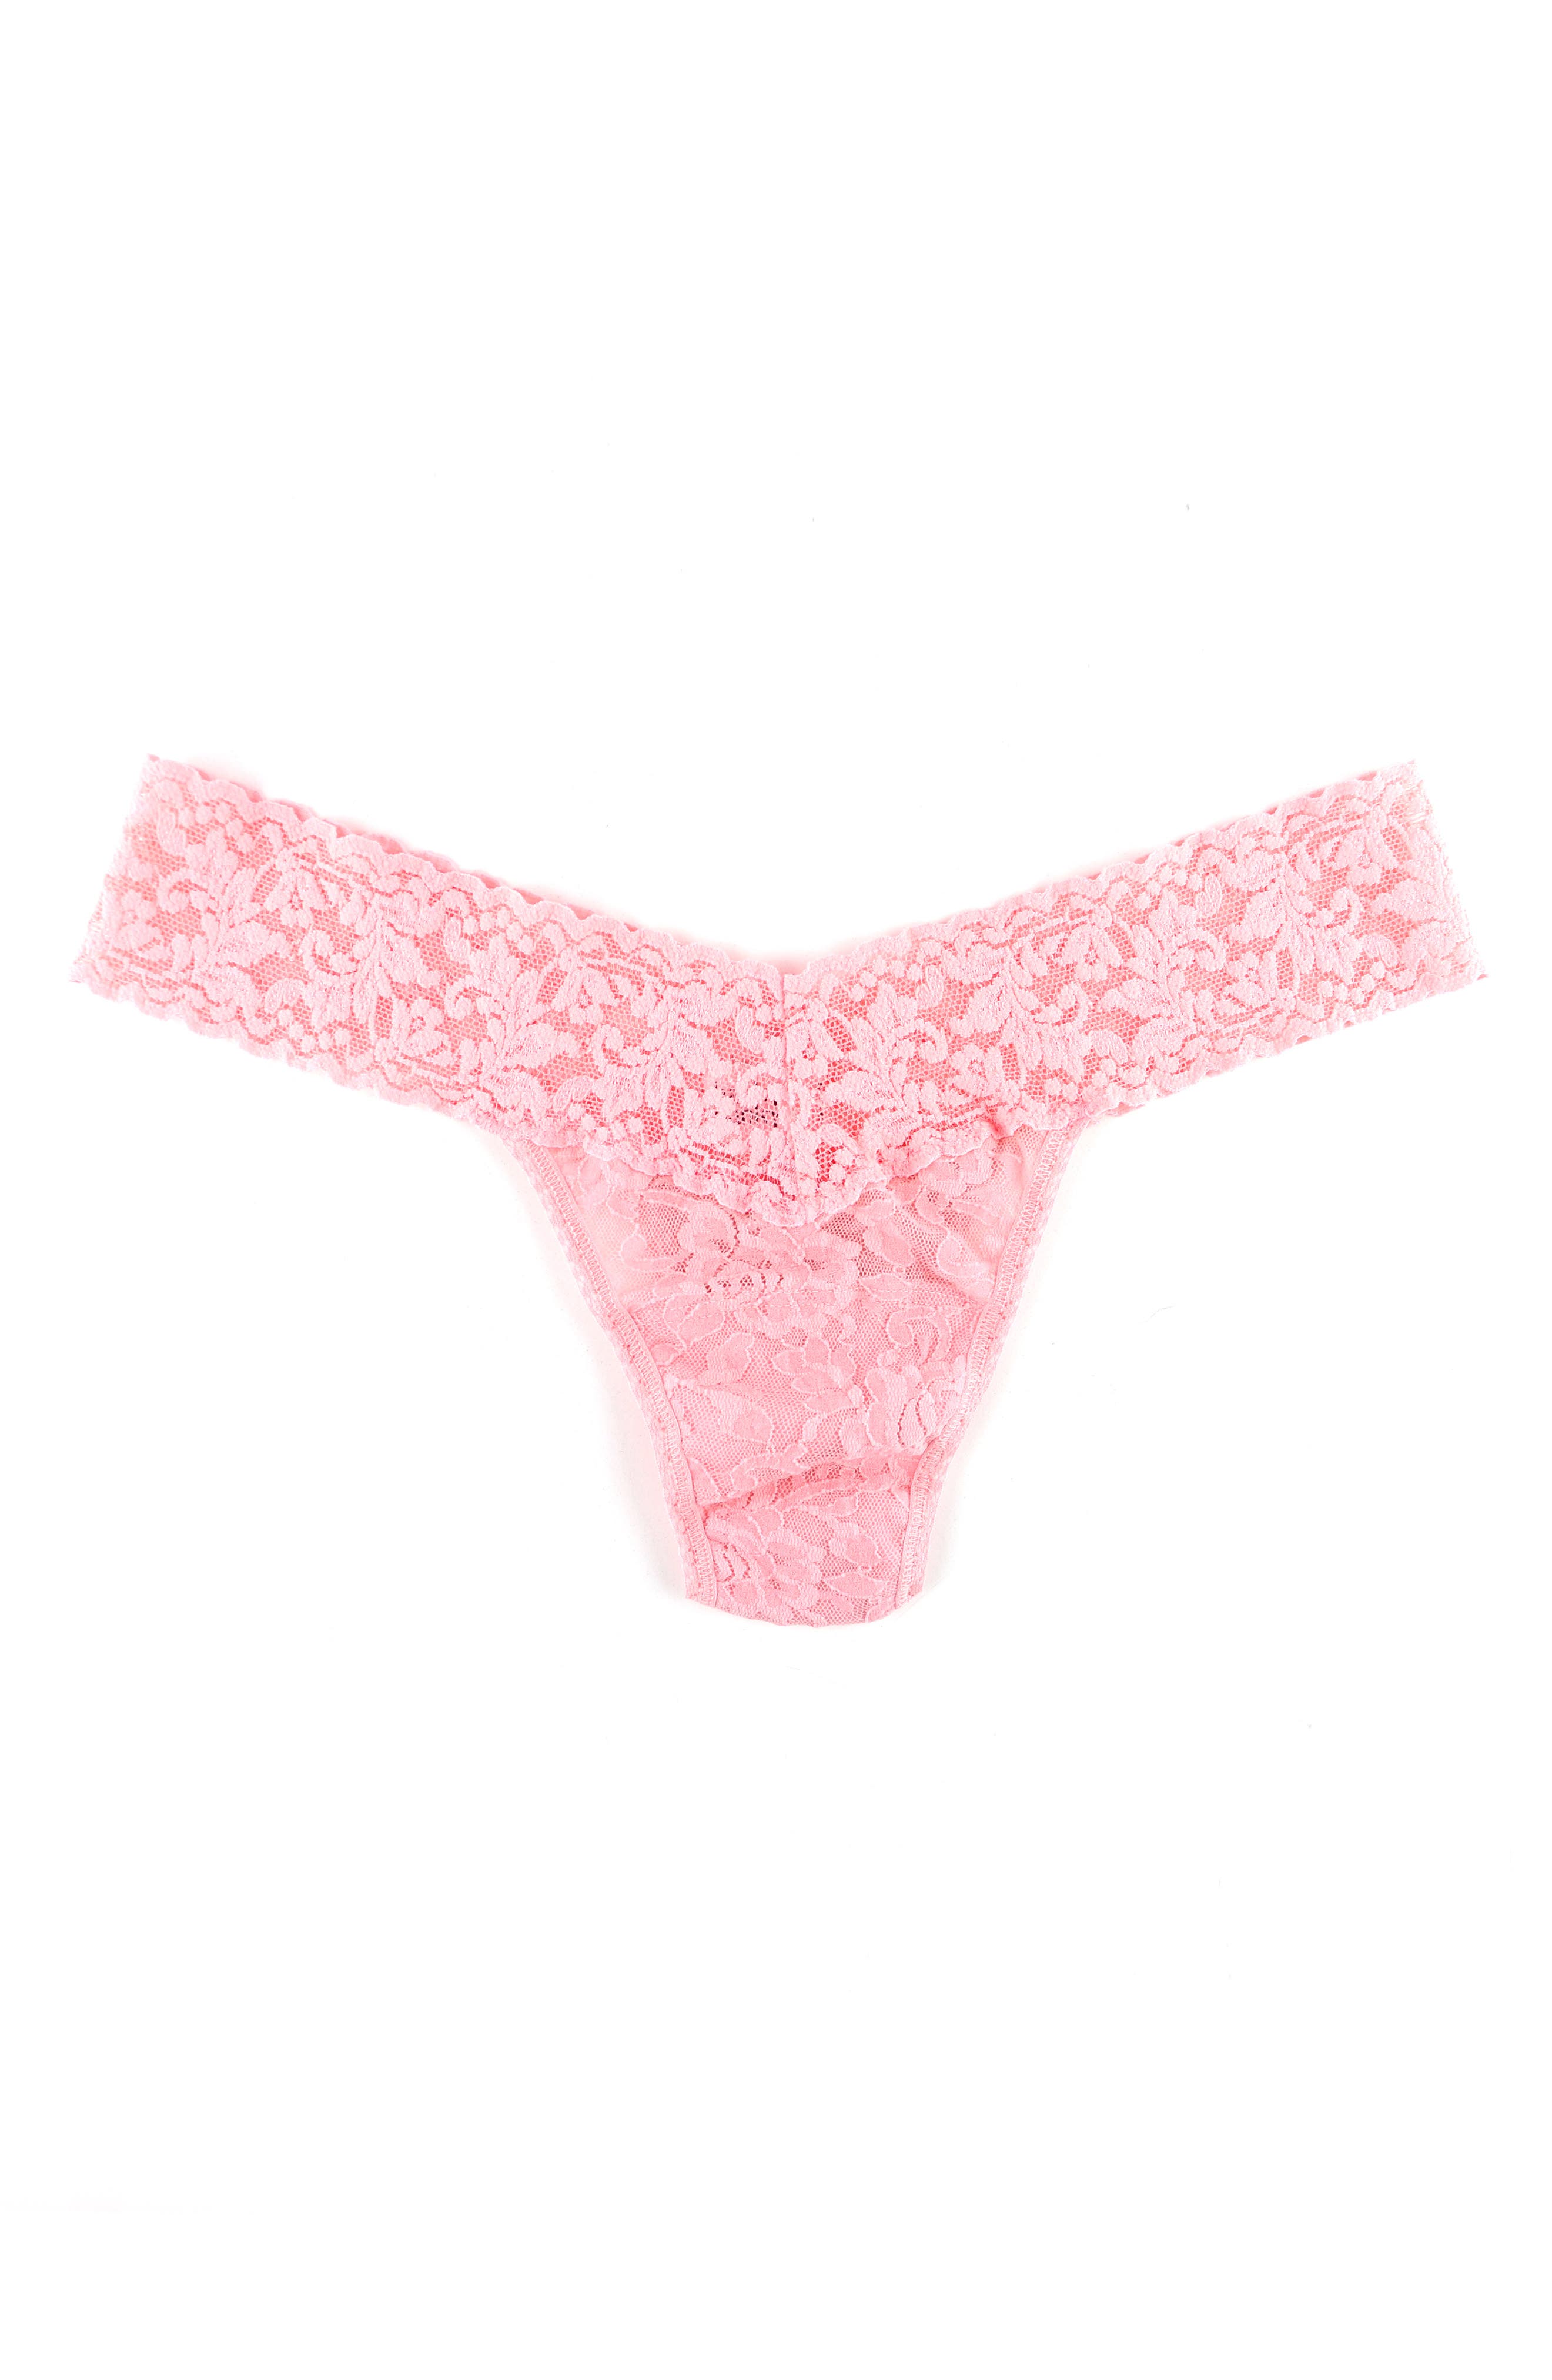 New PINK by Victoria's Secret Pink Lace Thong CHOOSE YOUR SIZE